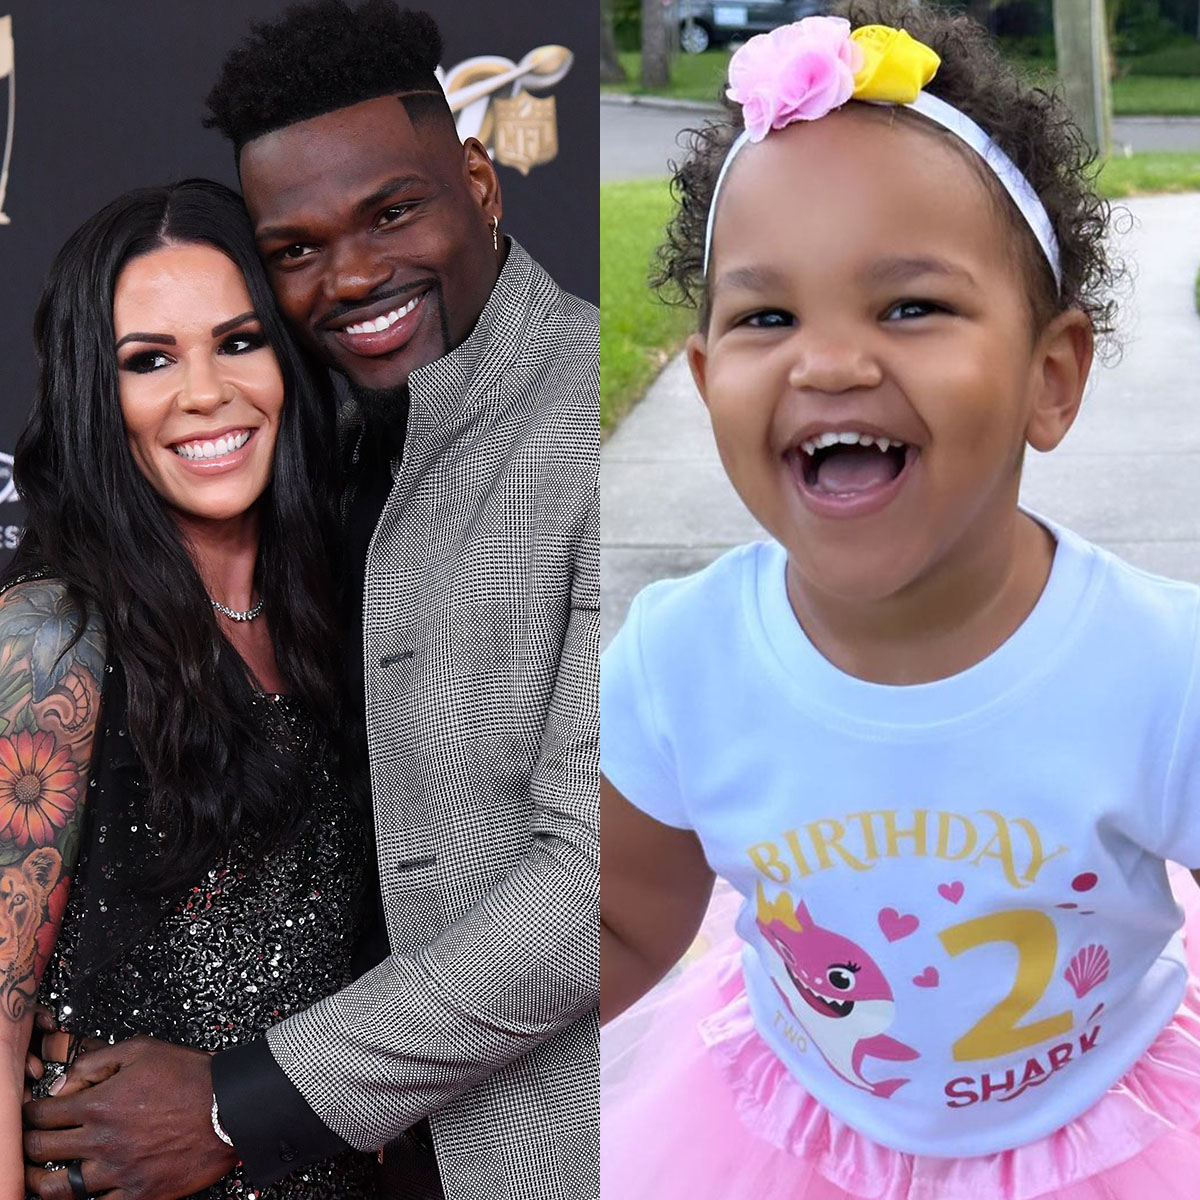 Shaquil Barrett’s Wife Jordanna Gets Tattoo in Honor of Late Daughter